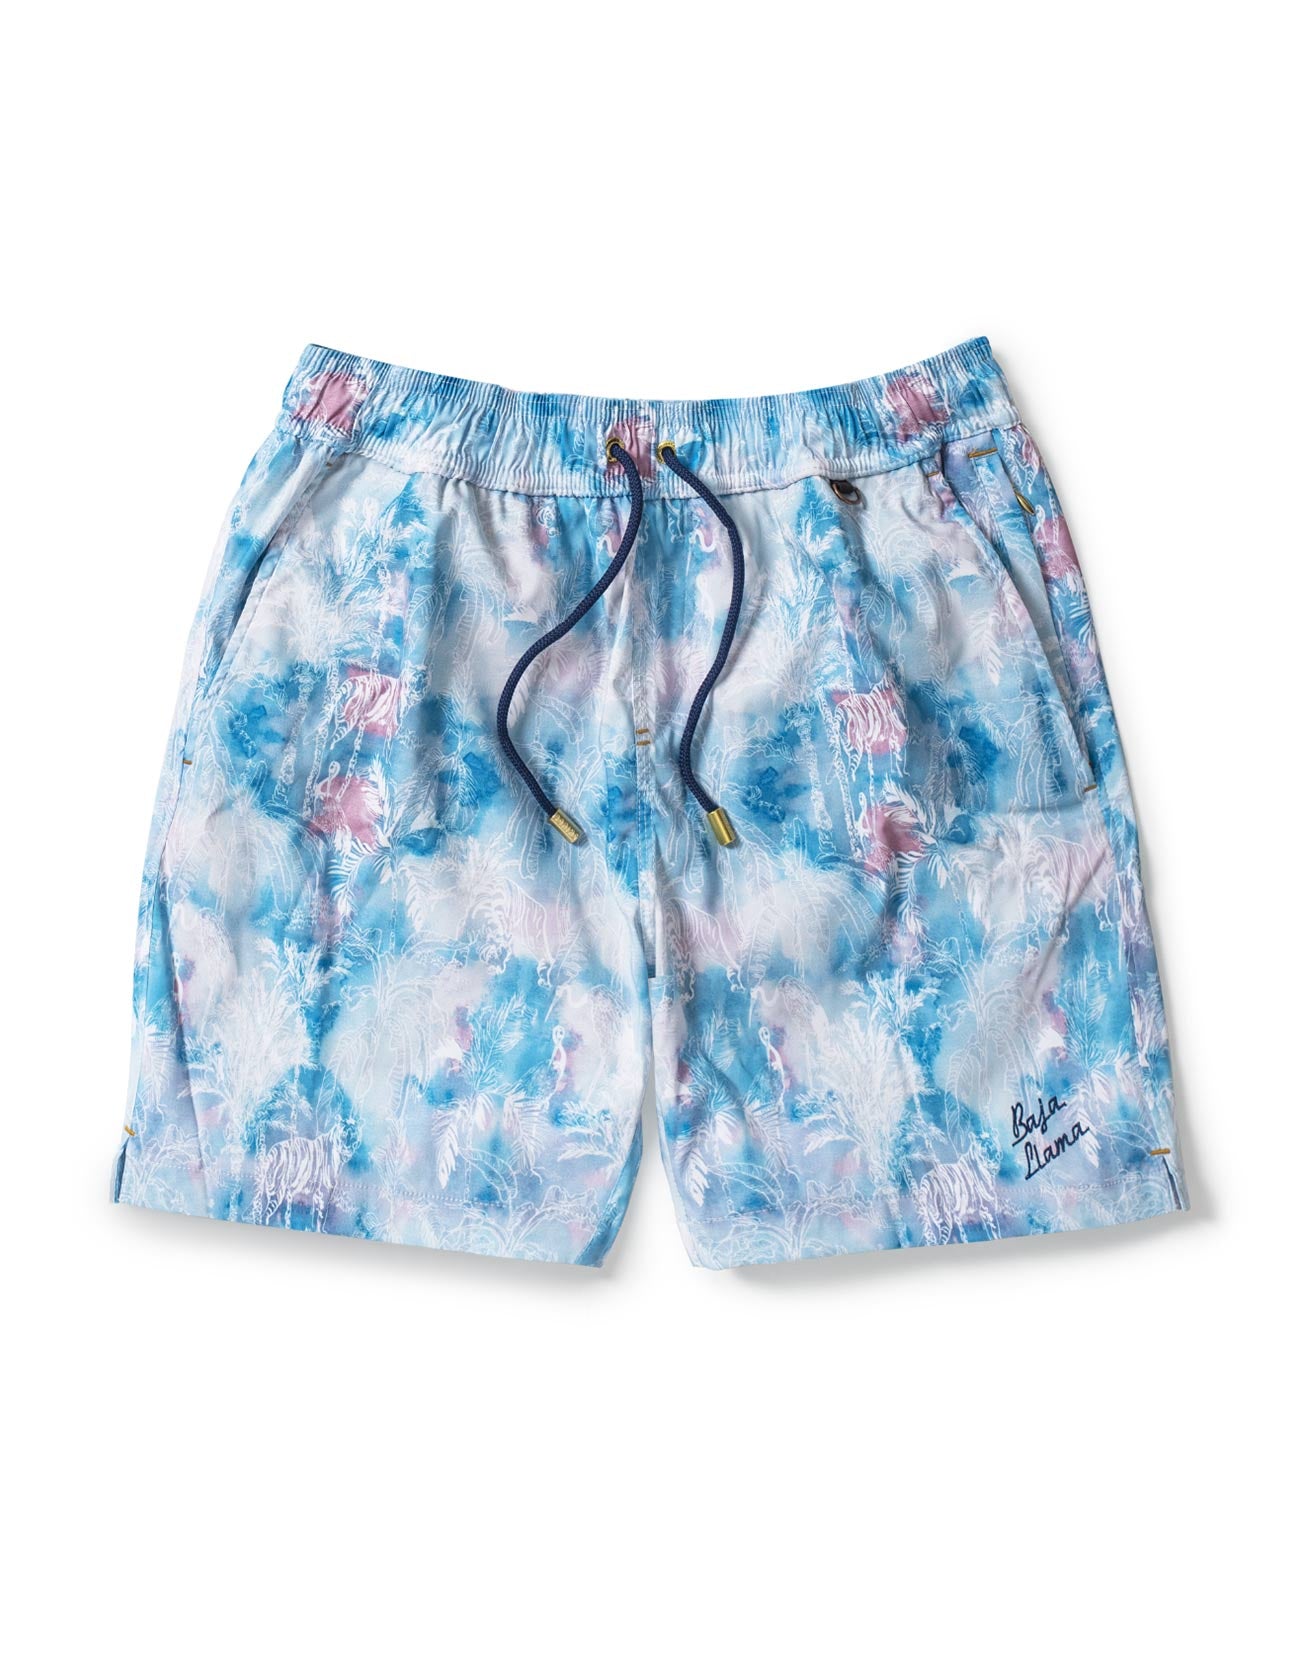 Blue and white tie dye-inspired with incognito jungle print featuring tiger and stork in white.